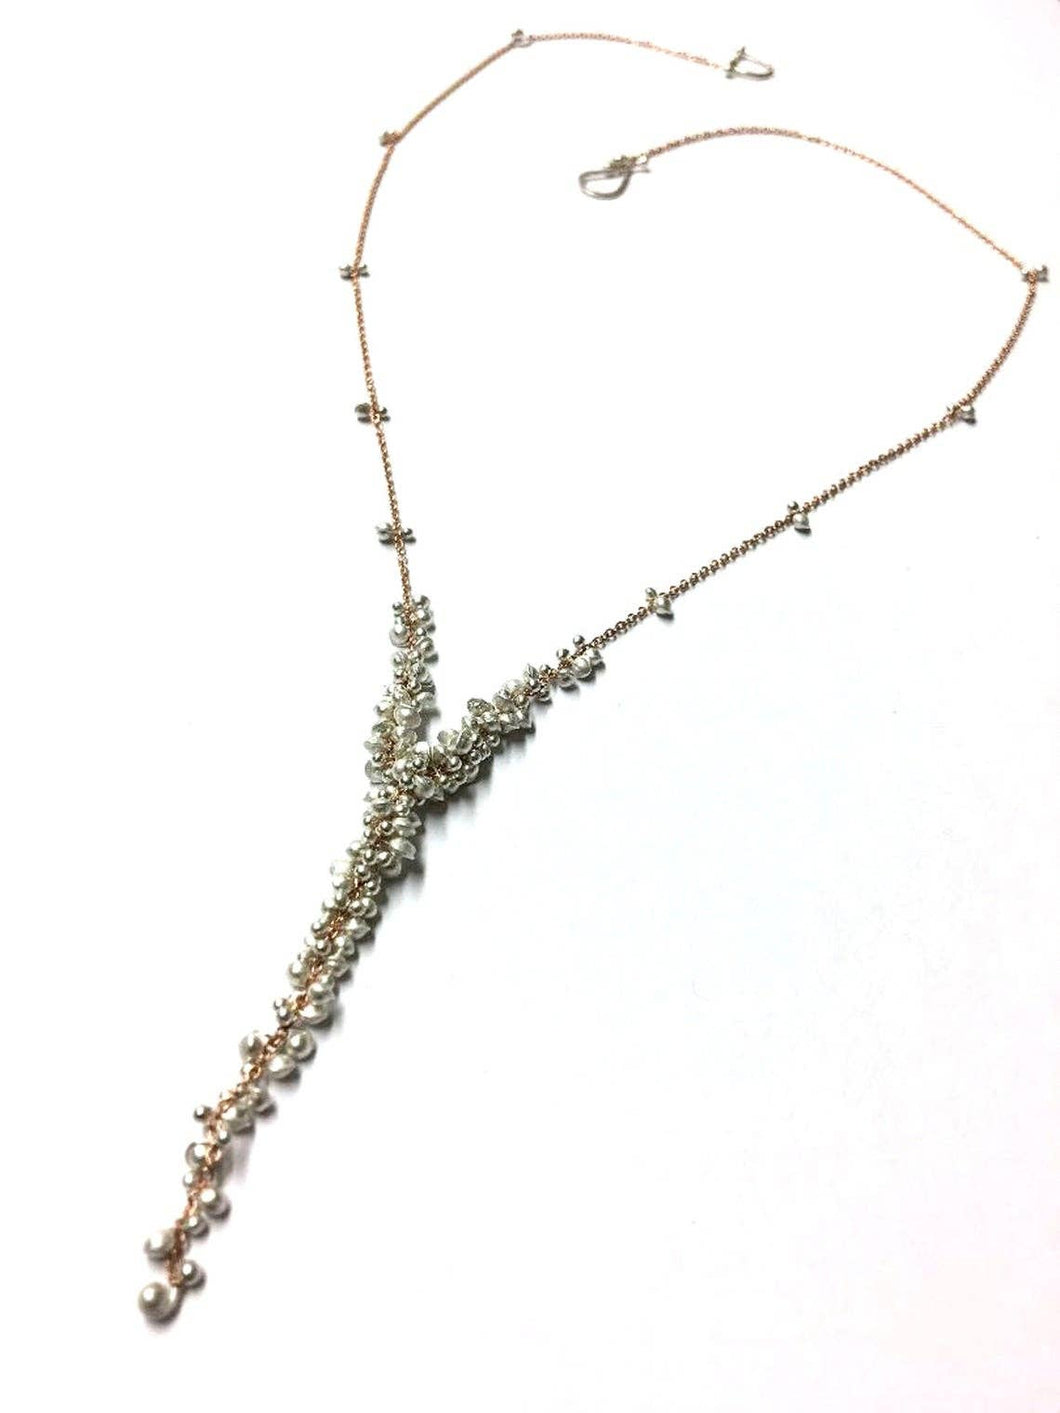 Cascading Wisteria Necklace- 18 inches